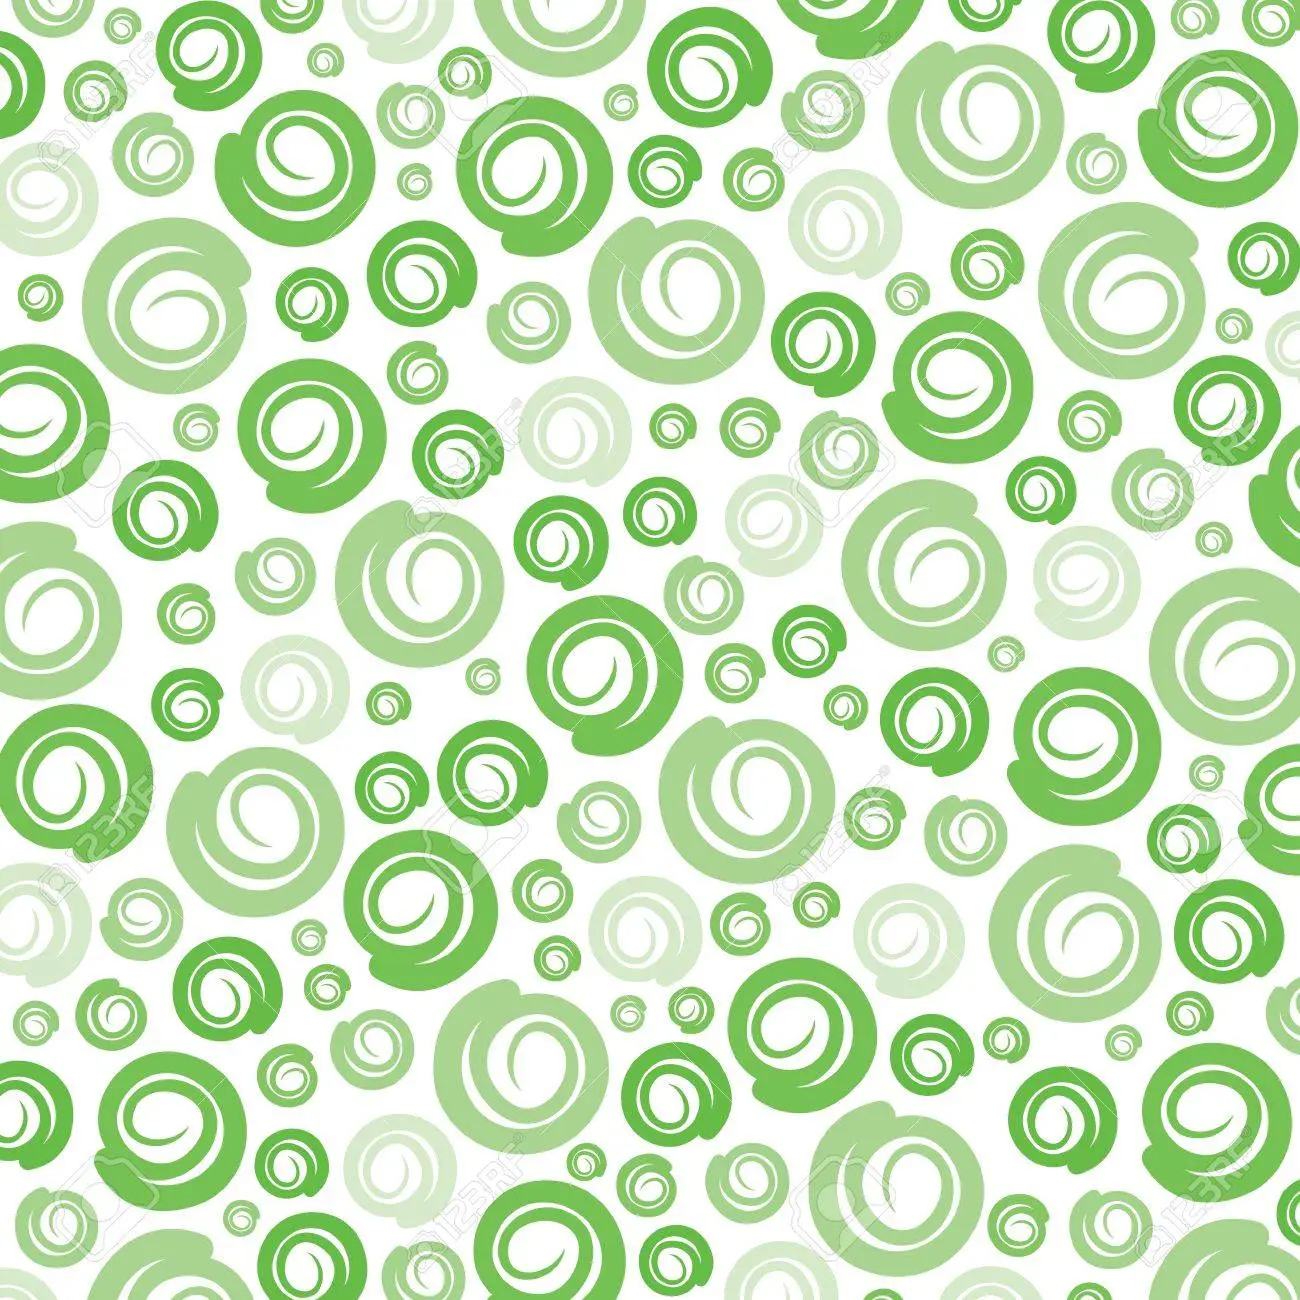 Green swirl pattern background royalty free svg cliparts vectors and stock illustration image